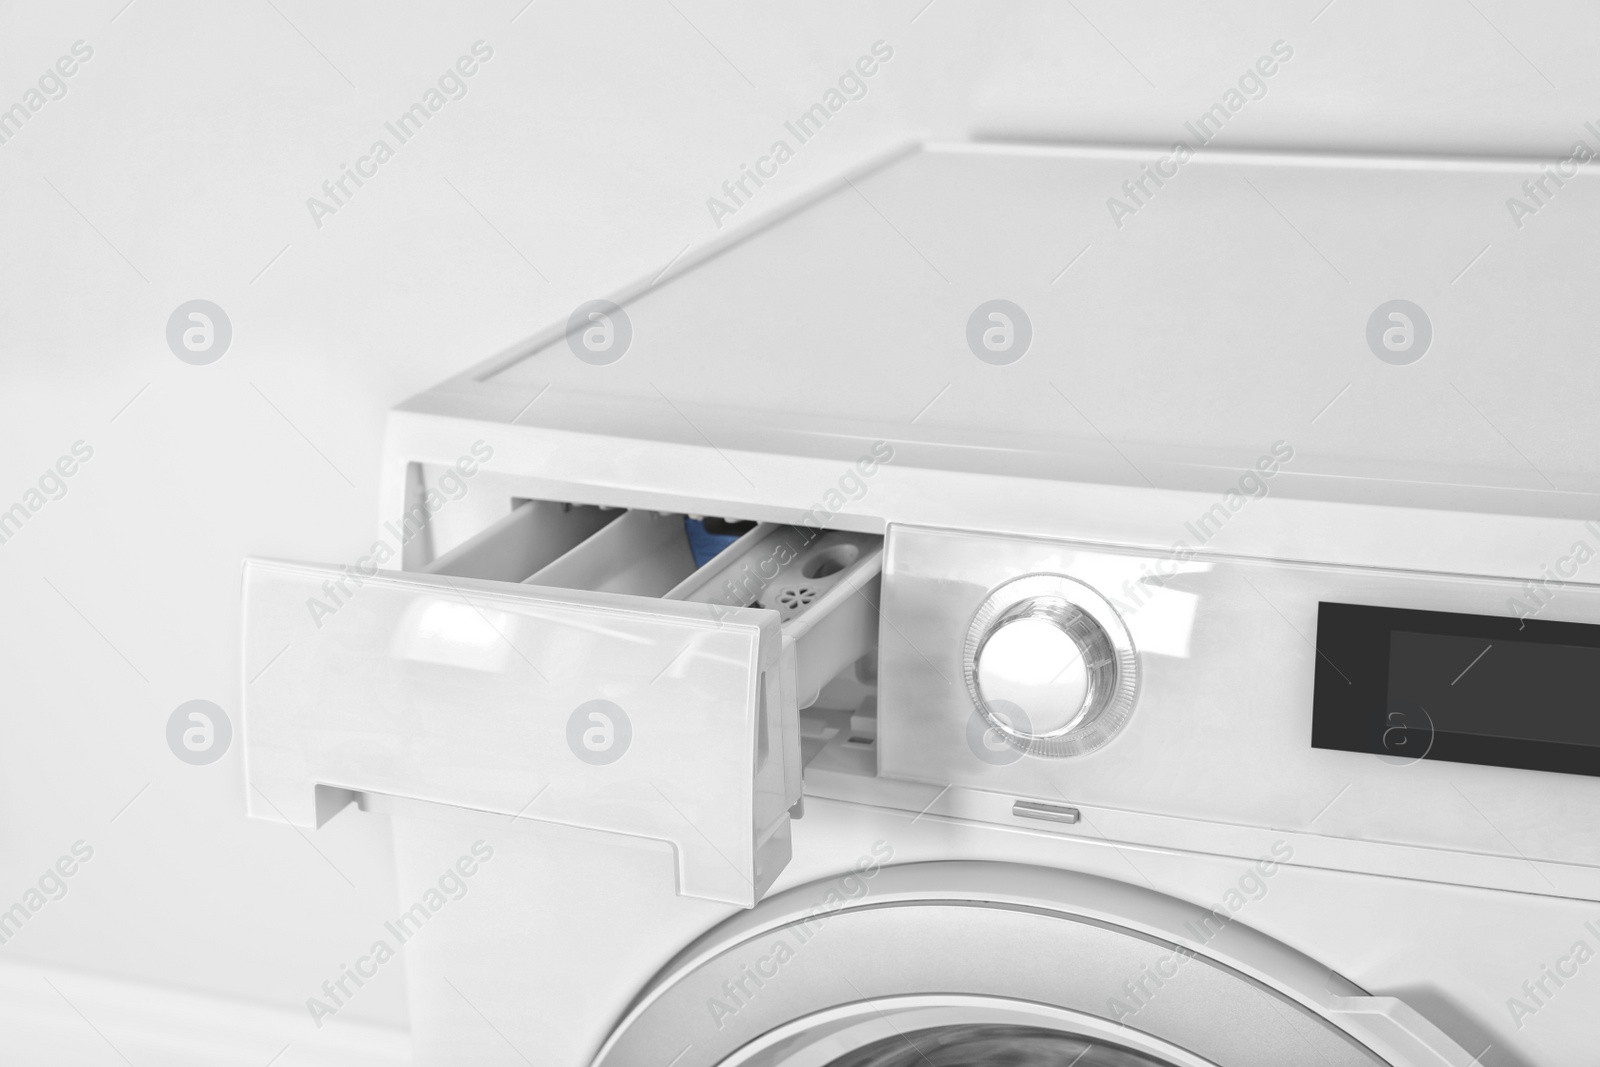 Photo of Washing machine with open detergent drawer on white background, closeup. Laundry day